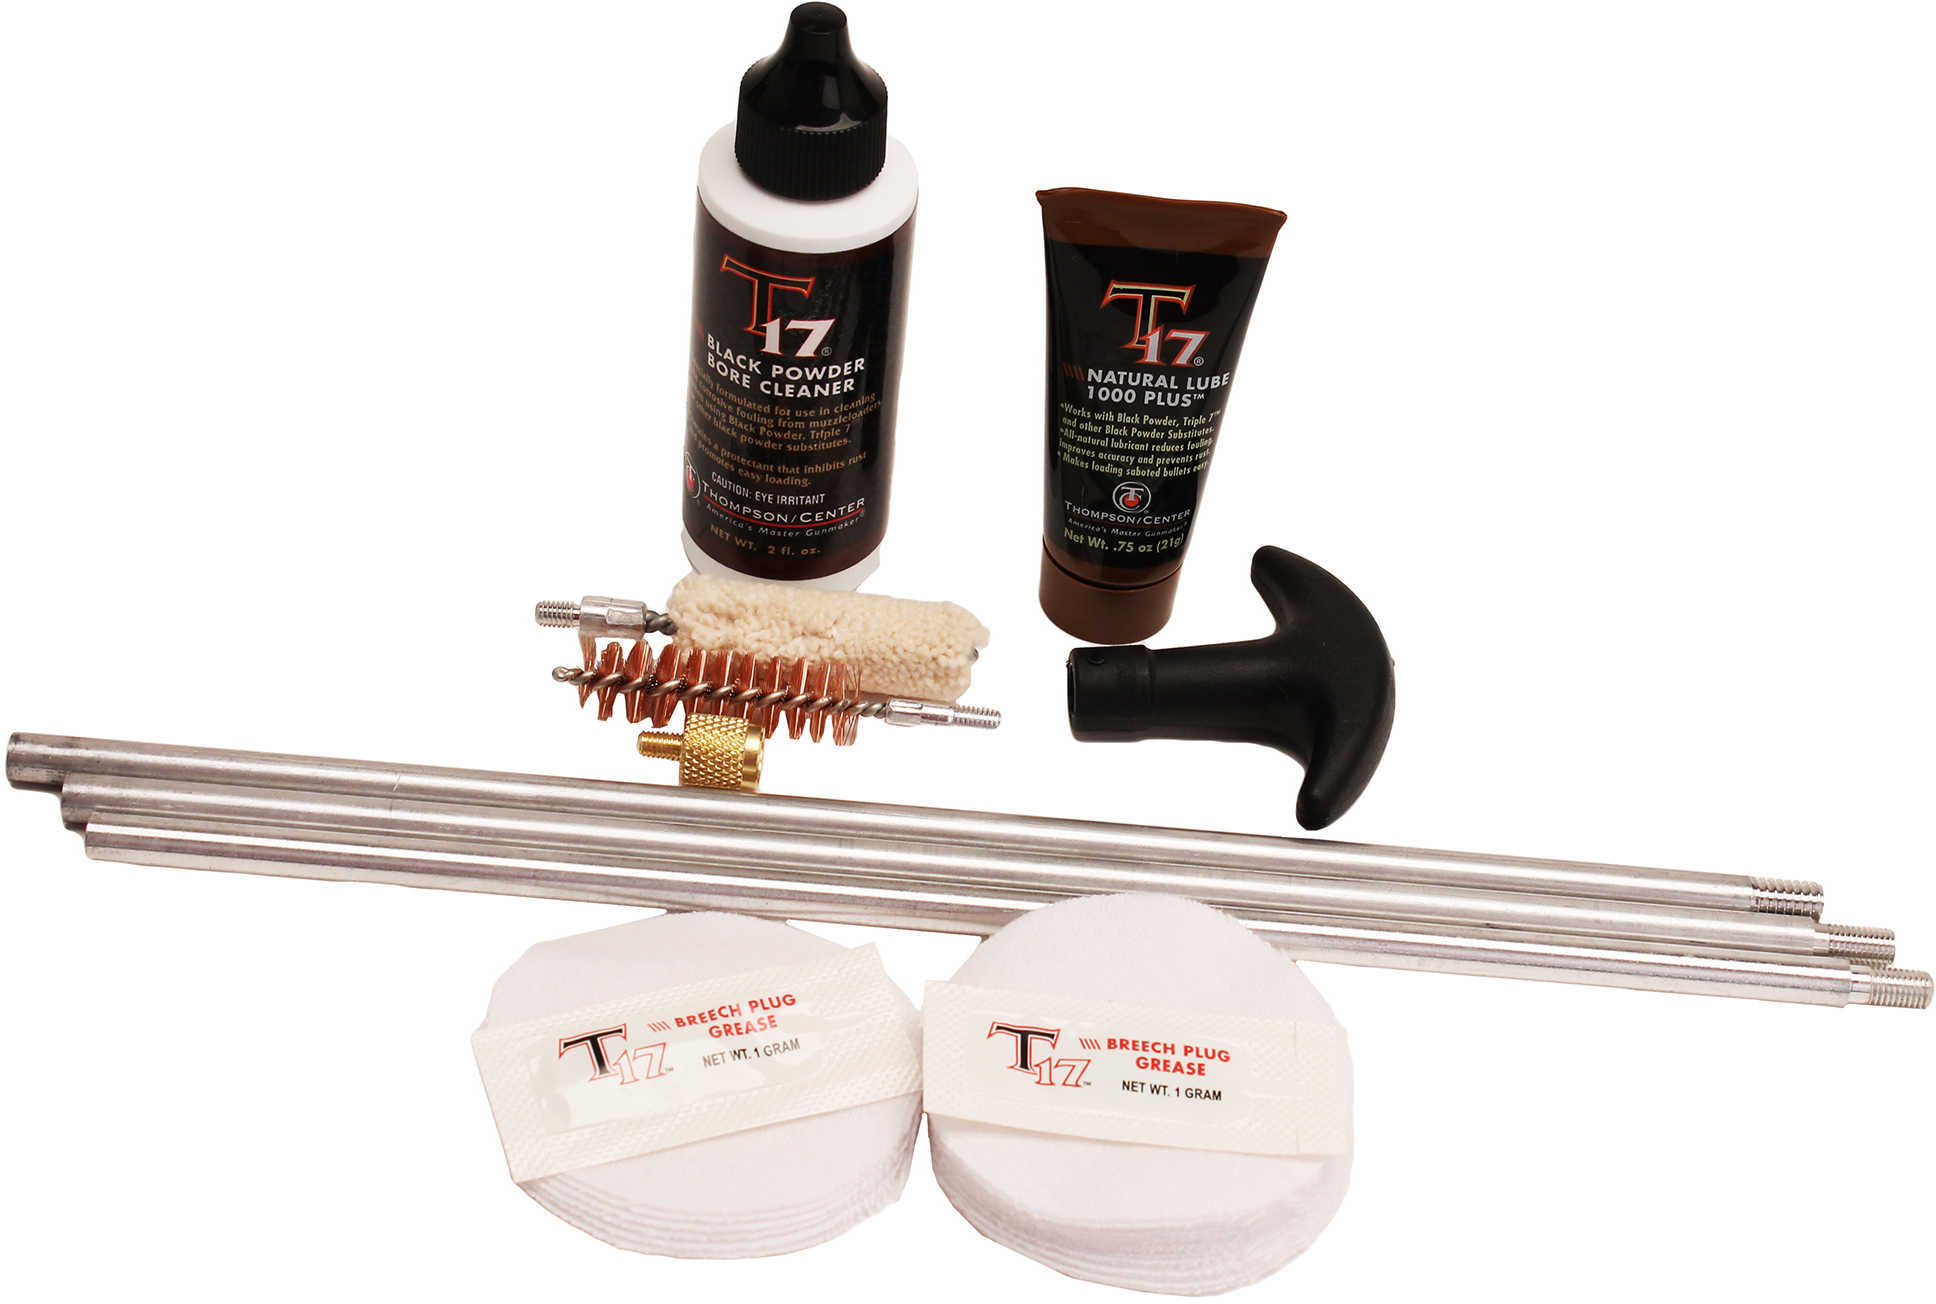 Thompson/Center Arms T17 Blackpowder Cleaning Kit Md: 31007530